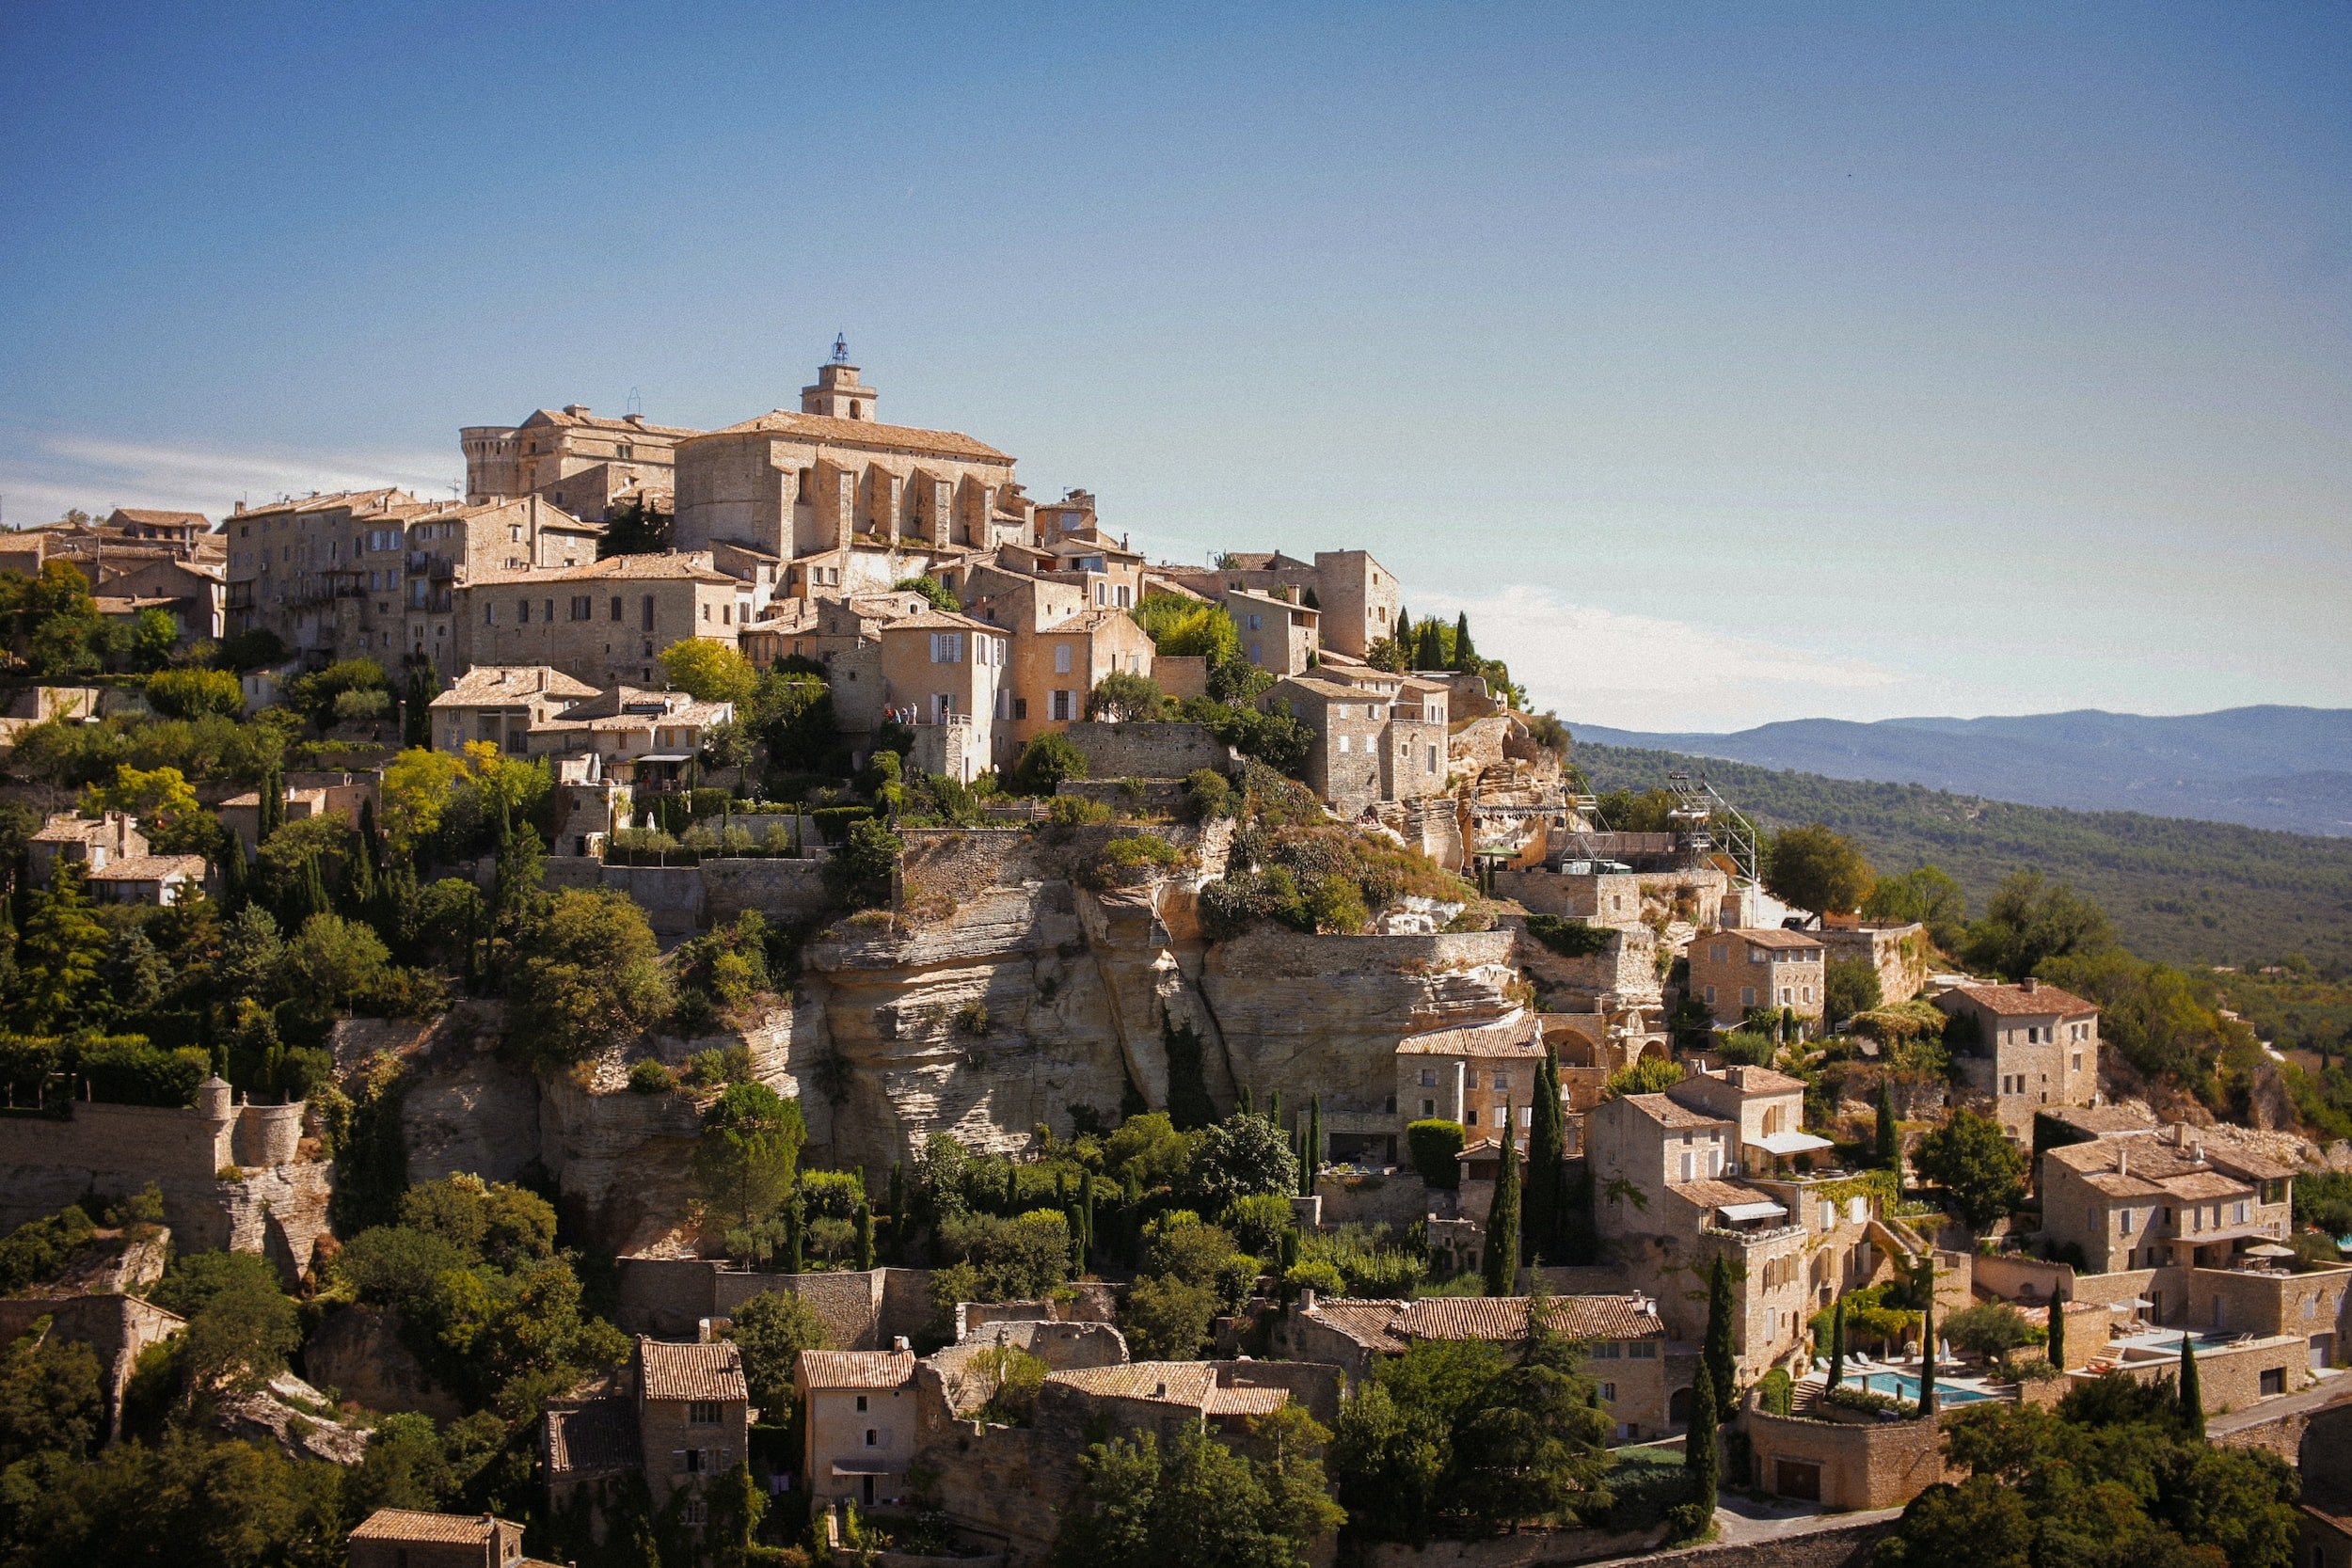 Cultural discovery of Gordes in the Luberon, in seminar activity